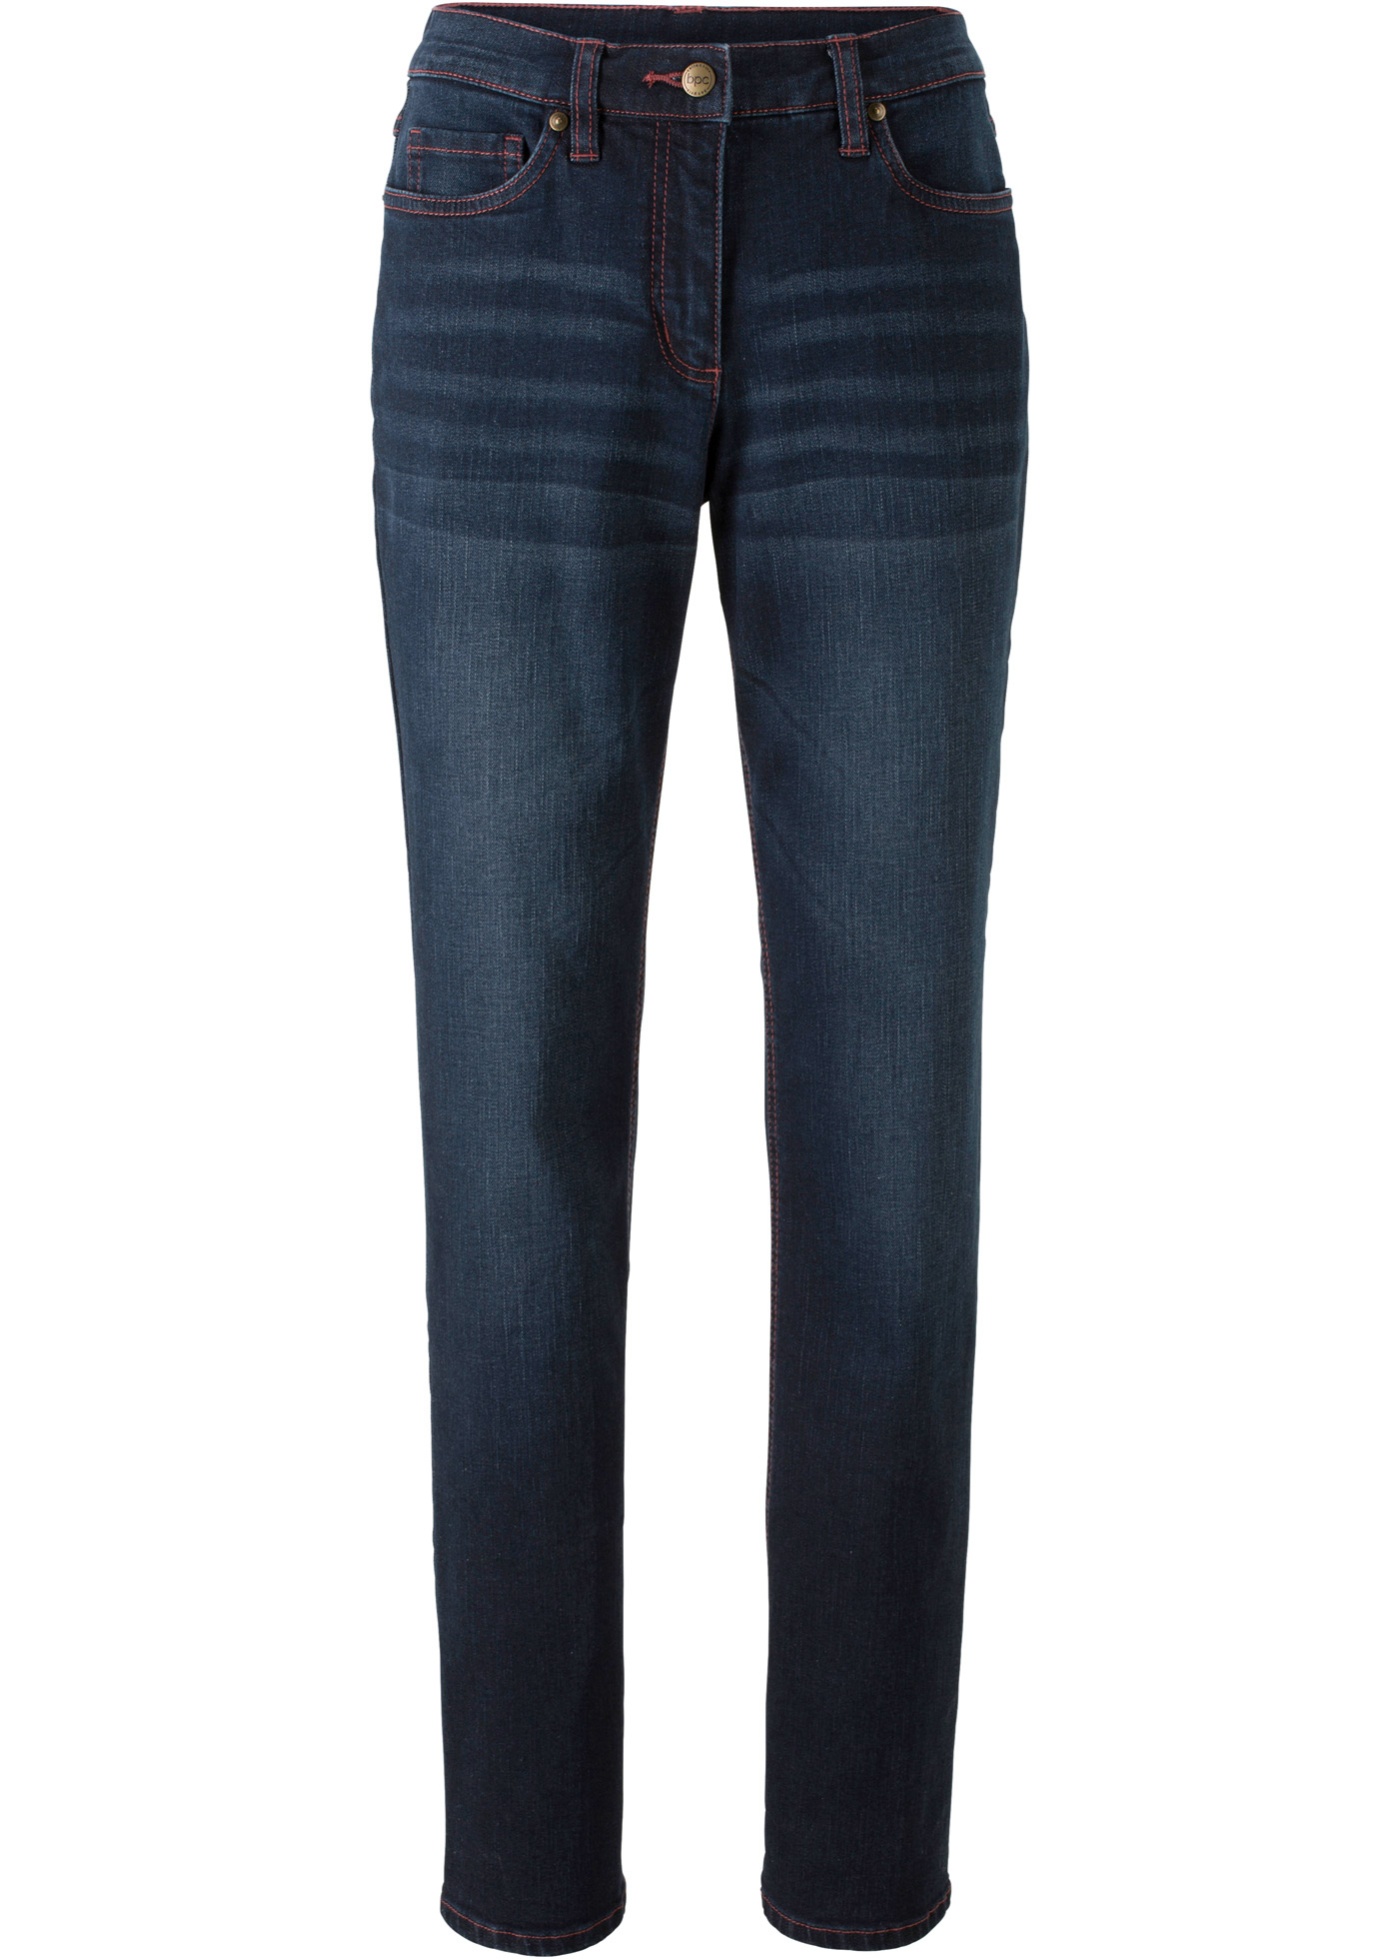 jean extensible à taille confortable, straight